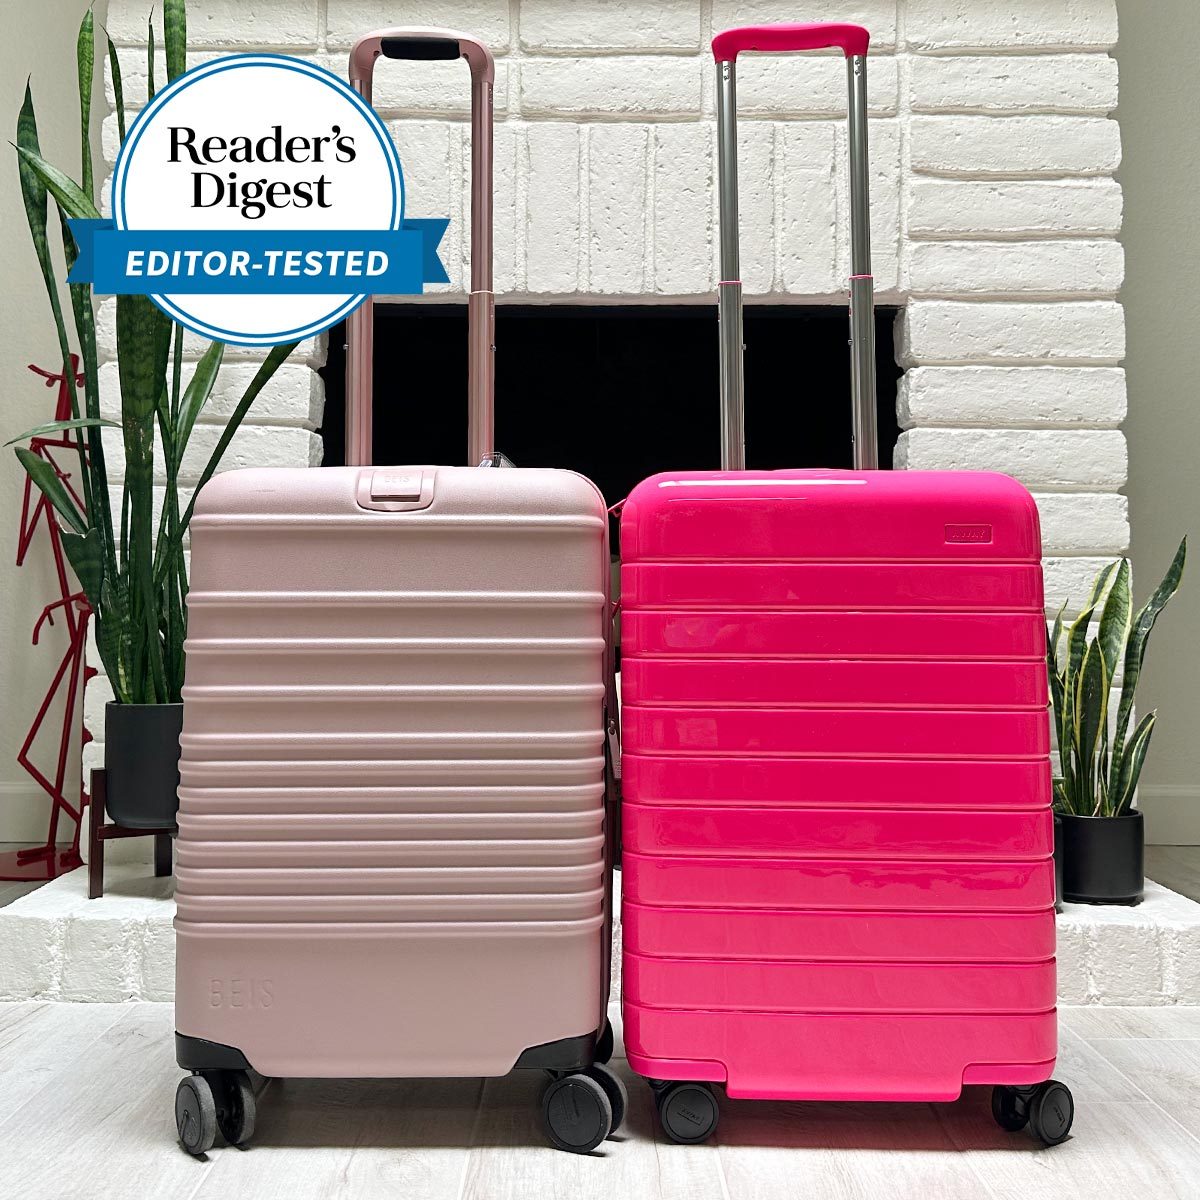 Away vs Beis Luggage: Which One is the Perfect Travel Companion